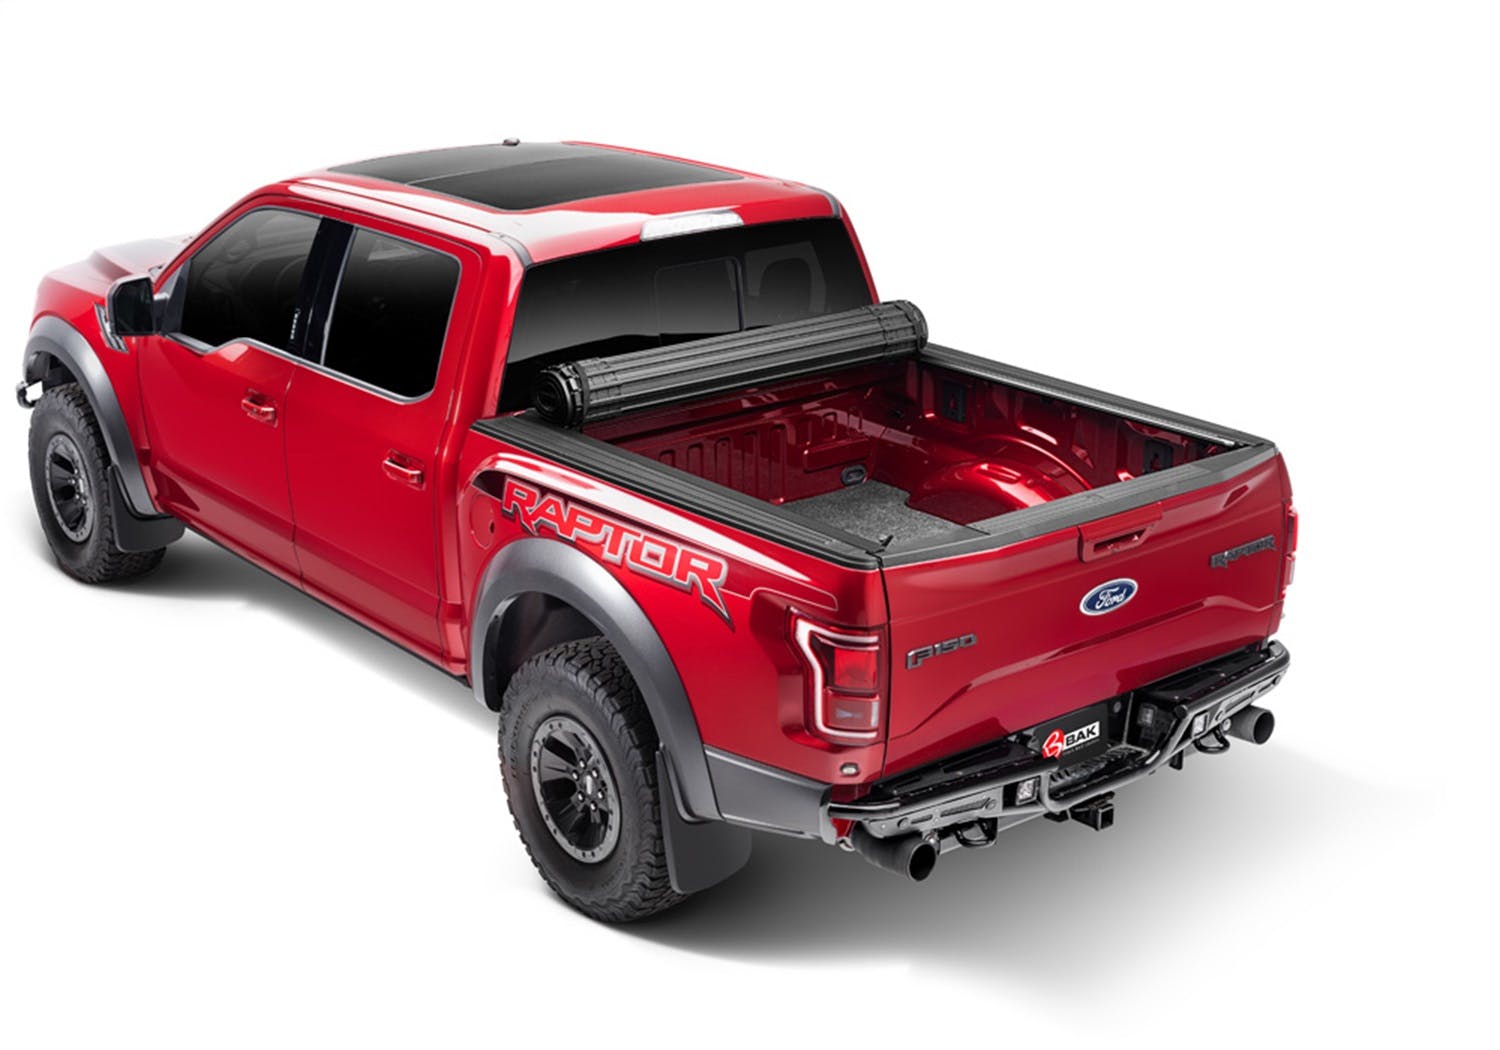 BAK Industries 80539 Revolver X4s Hard Rolling Truck Bed Cover